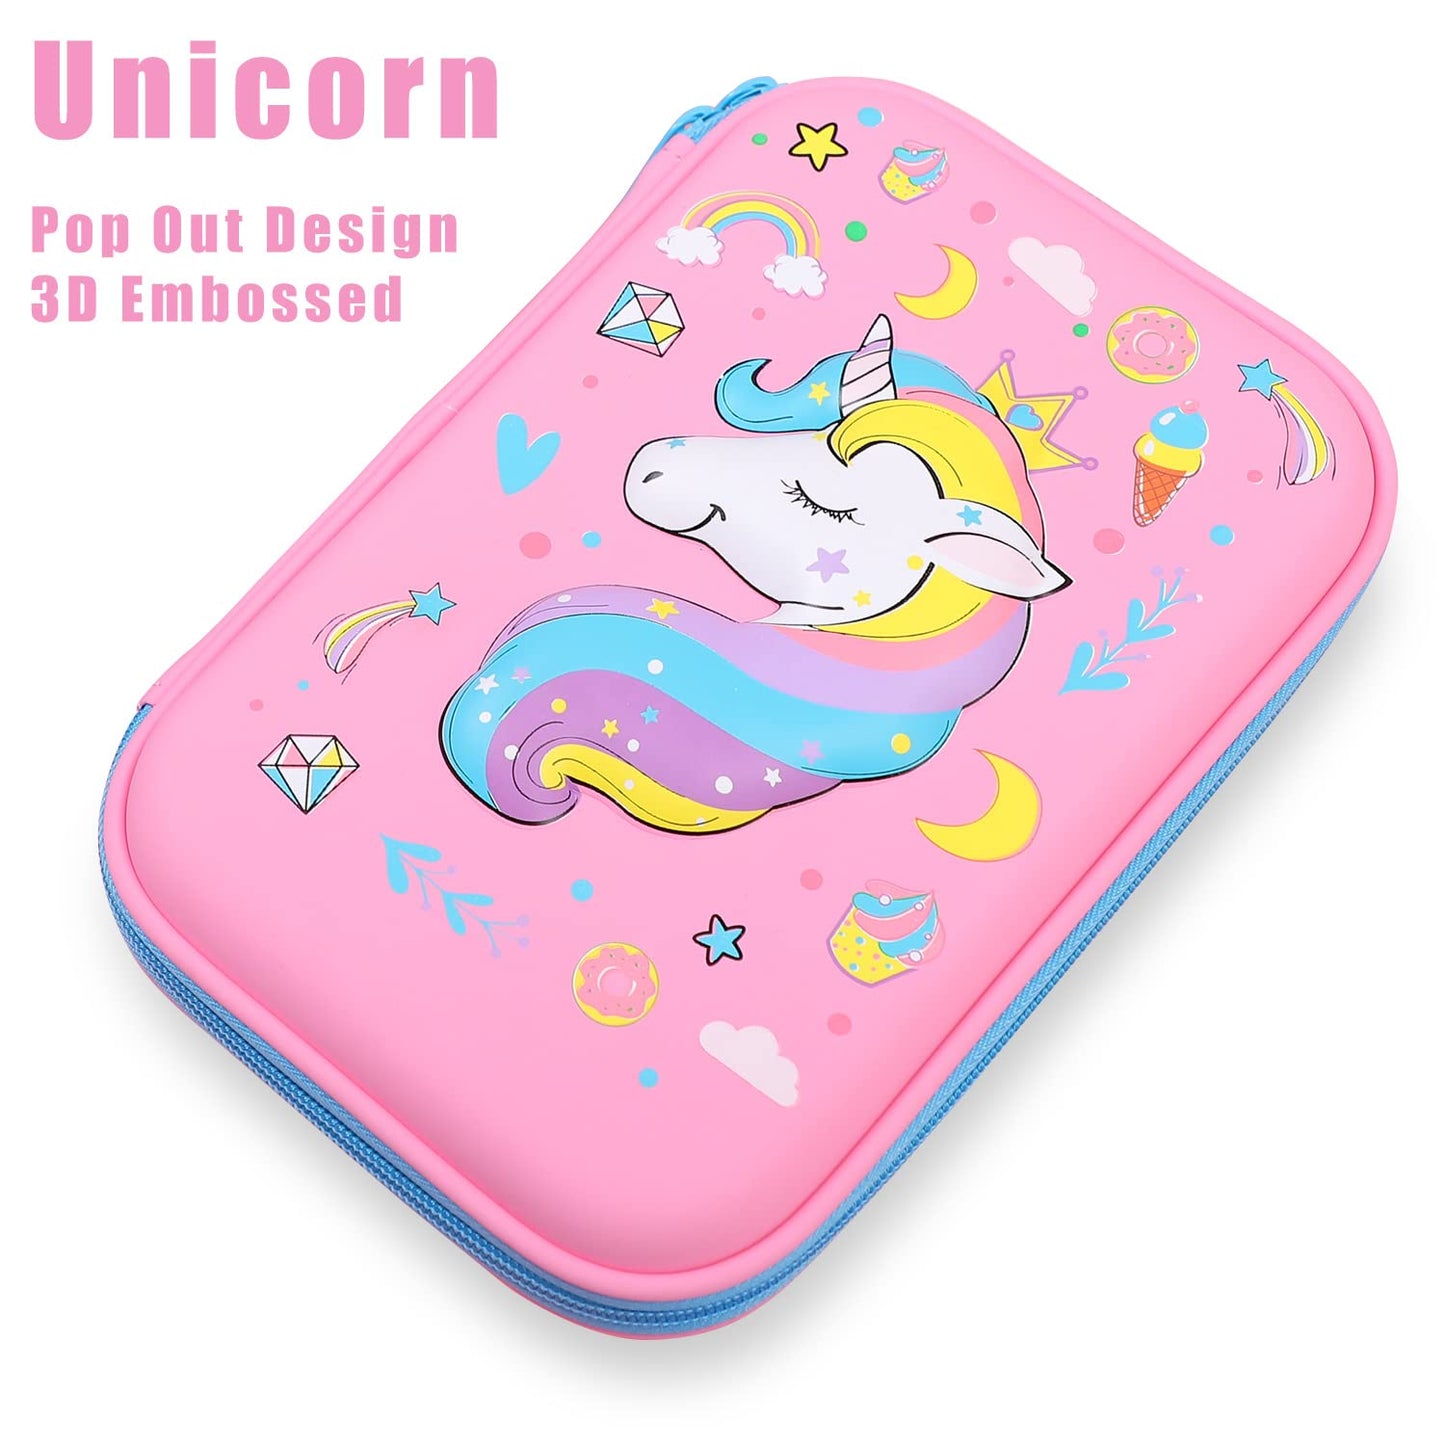 SOOCUTE Crown Unicorn Gifts for Girls - Cute Big Size Hardtop Pencil Case with Compartment - Kids School Supply Organizer Stationery Box Zipper Pouch (Light Pink)